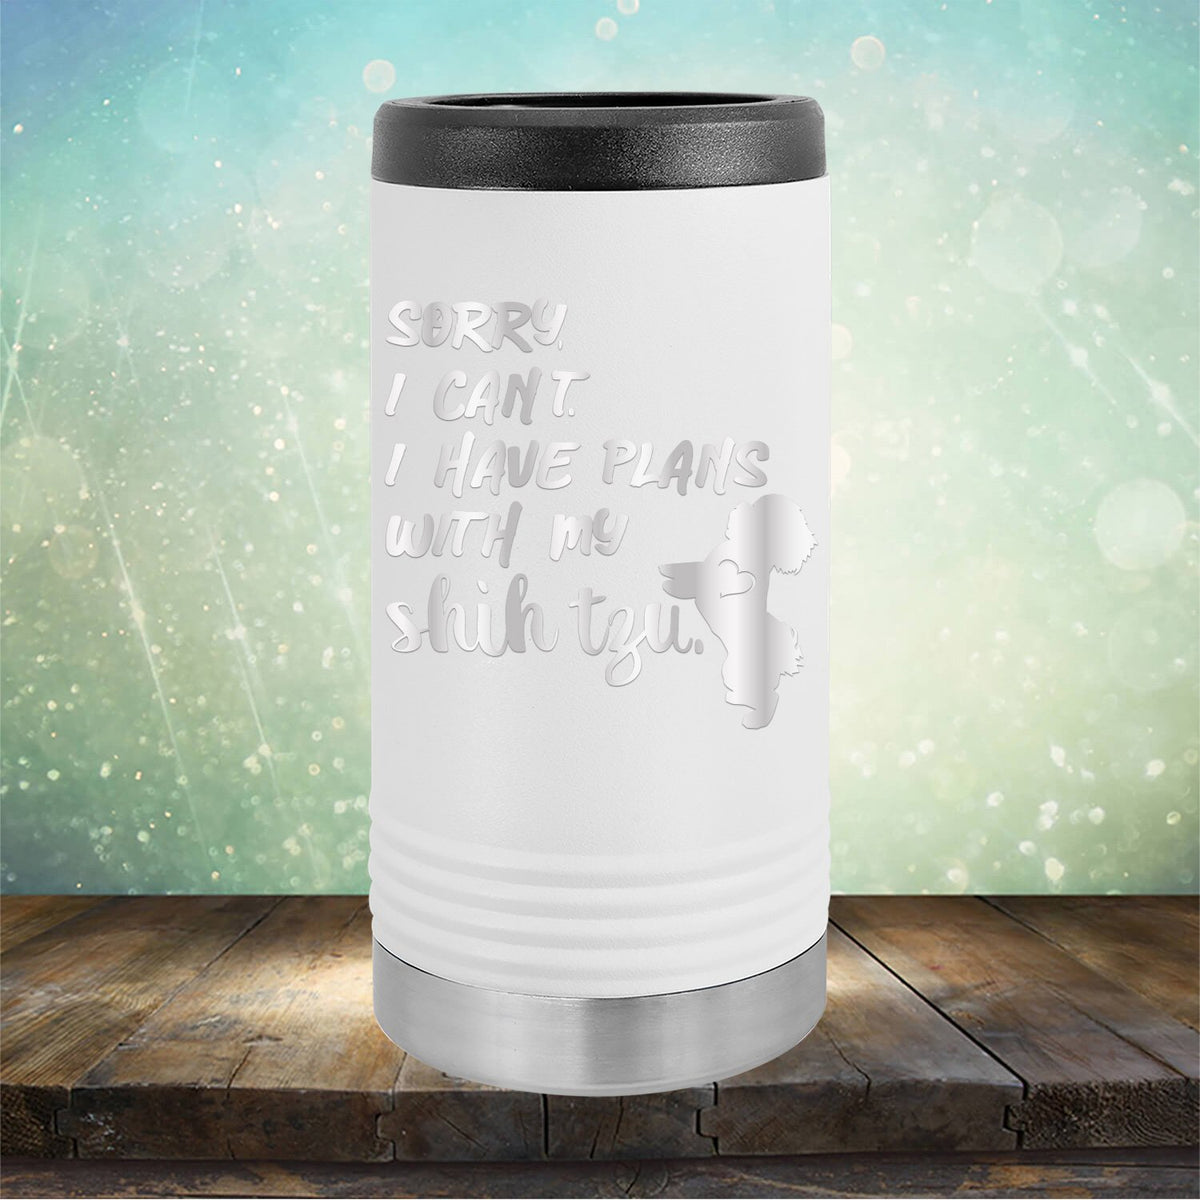 Sorry I Can&#39;t I Have Plans with My Shih Tzu - Laser Etched Tumbler Mug